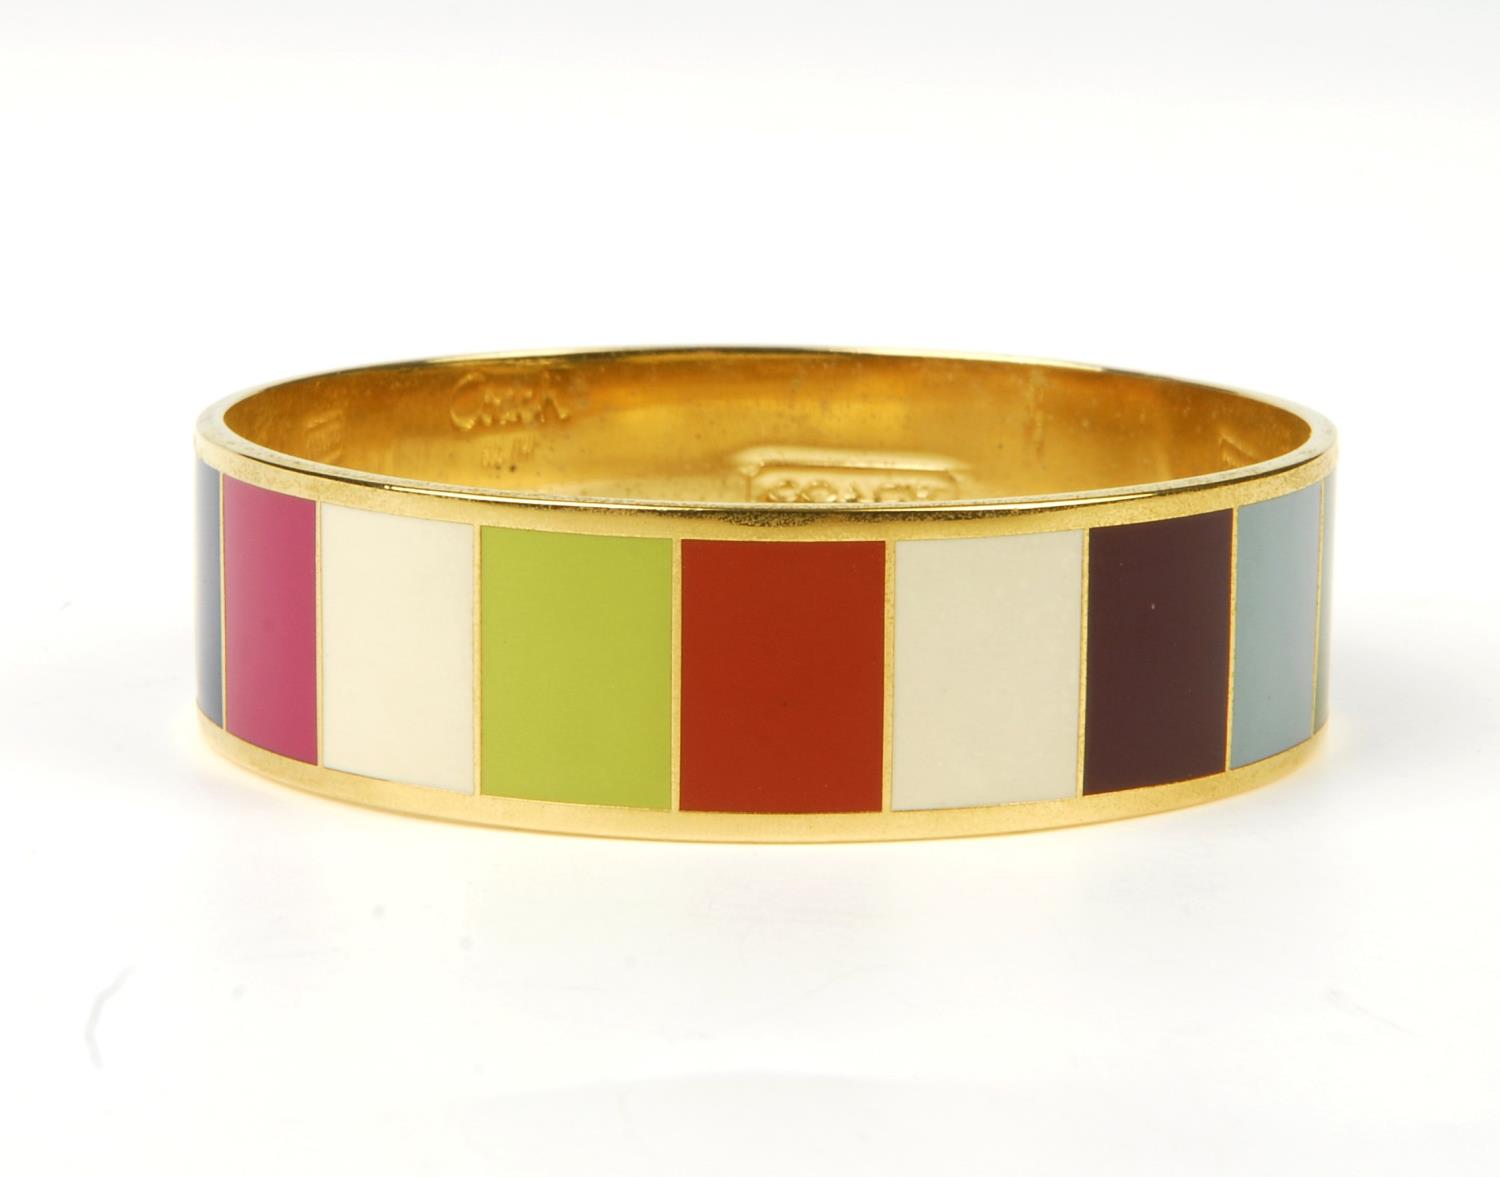 COACH - a Legacy striped bangle. The gold-tone bangle featuring multicoloured striped enamel inlay - Image 6 of 9